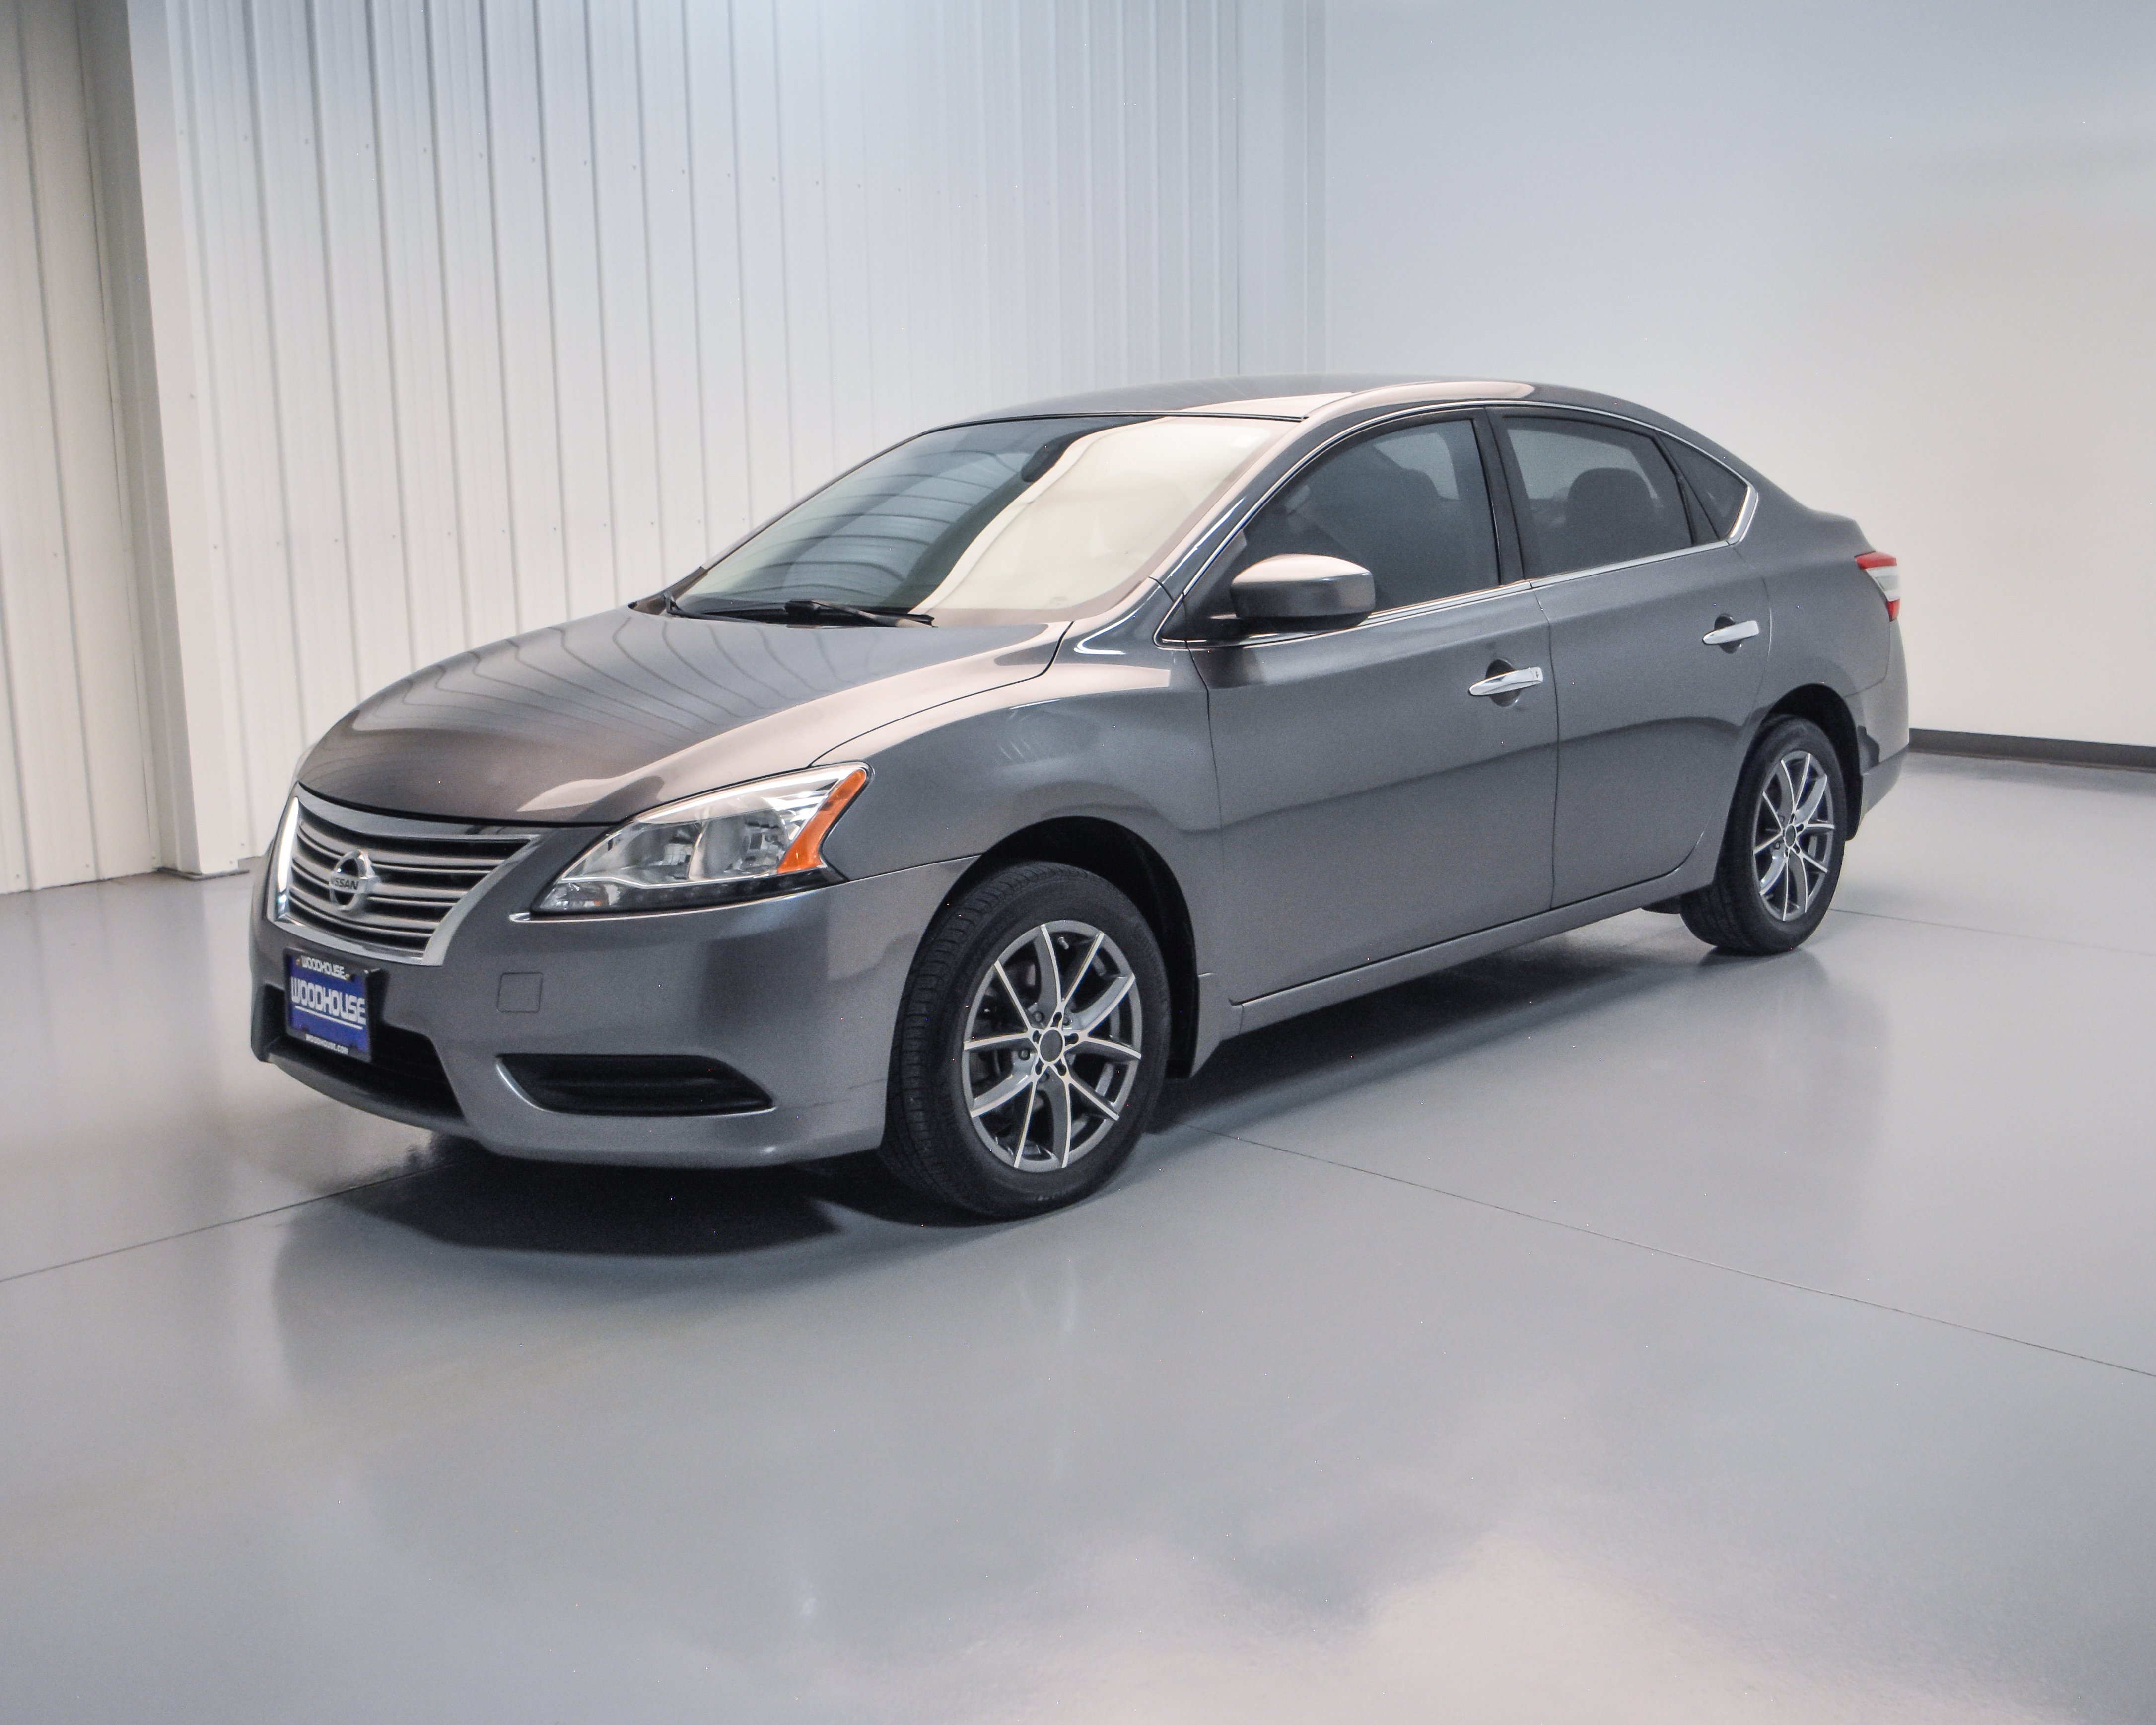 PreOwned 2015 Nissan Sentra S FWD 4dr Car